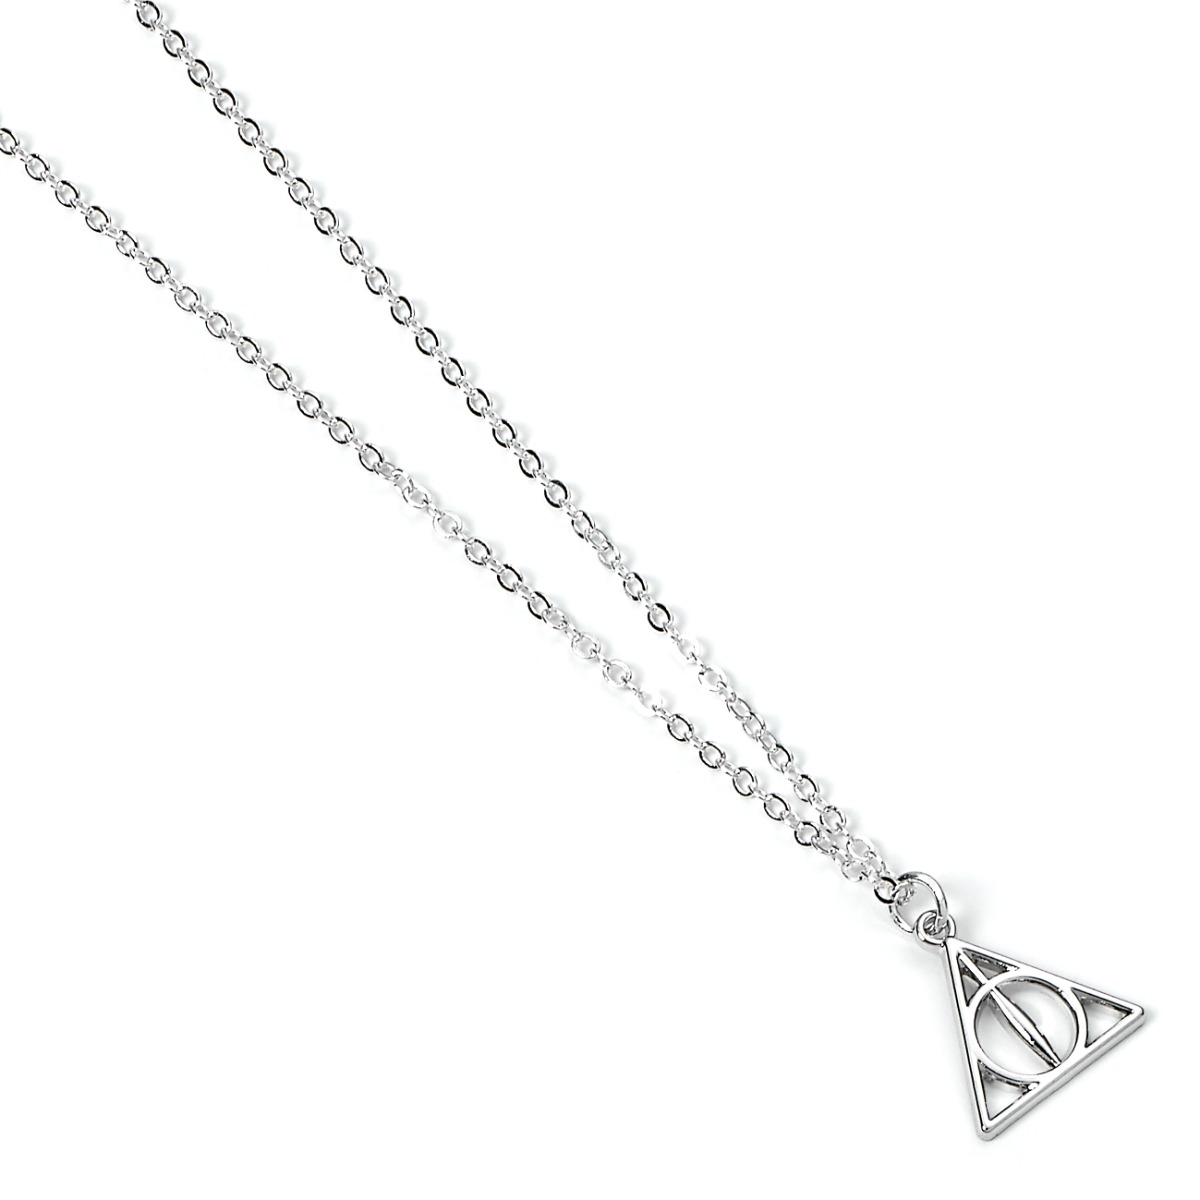 Harry Potter Official Deathly Hallows Necklace